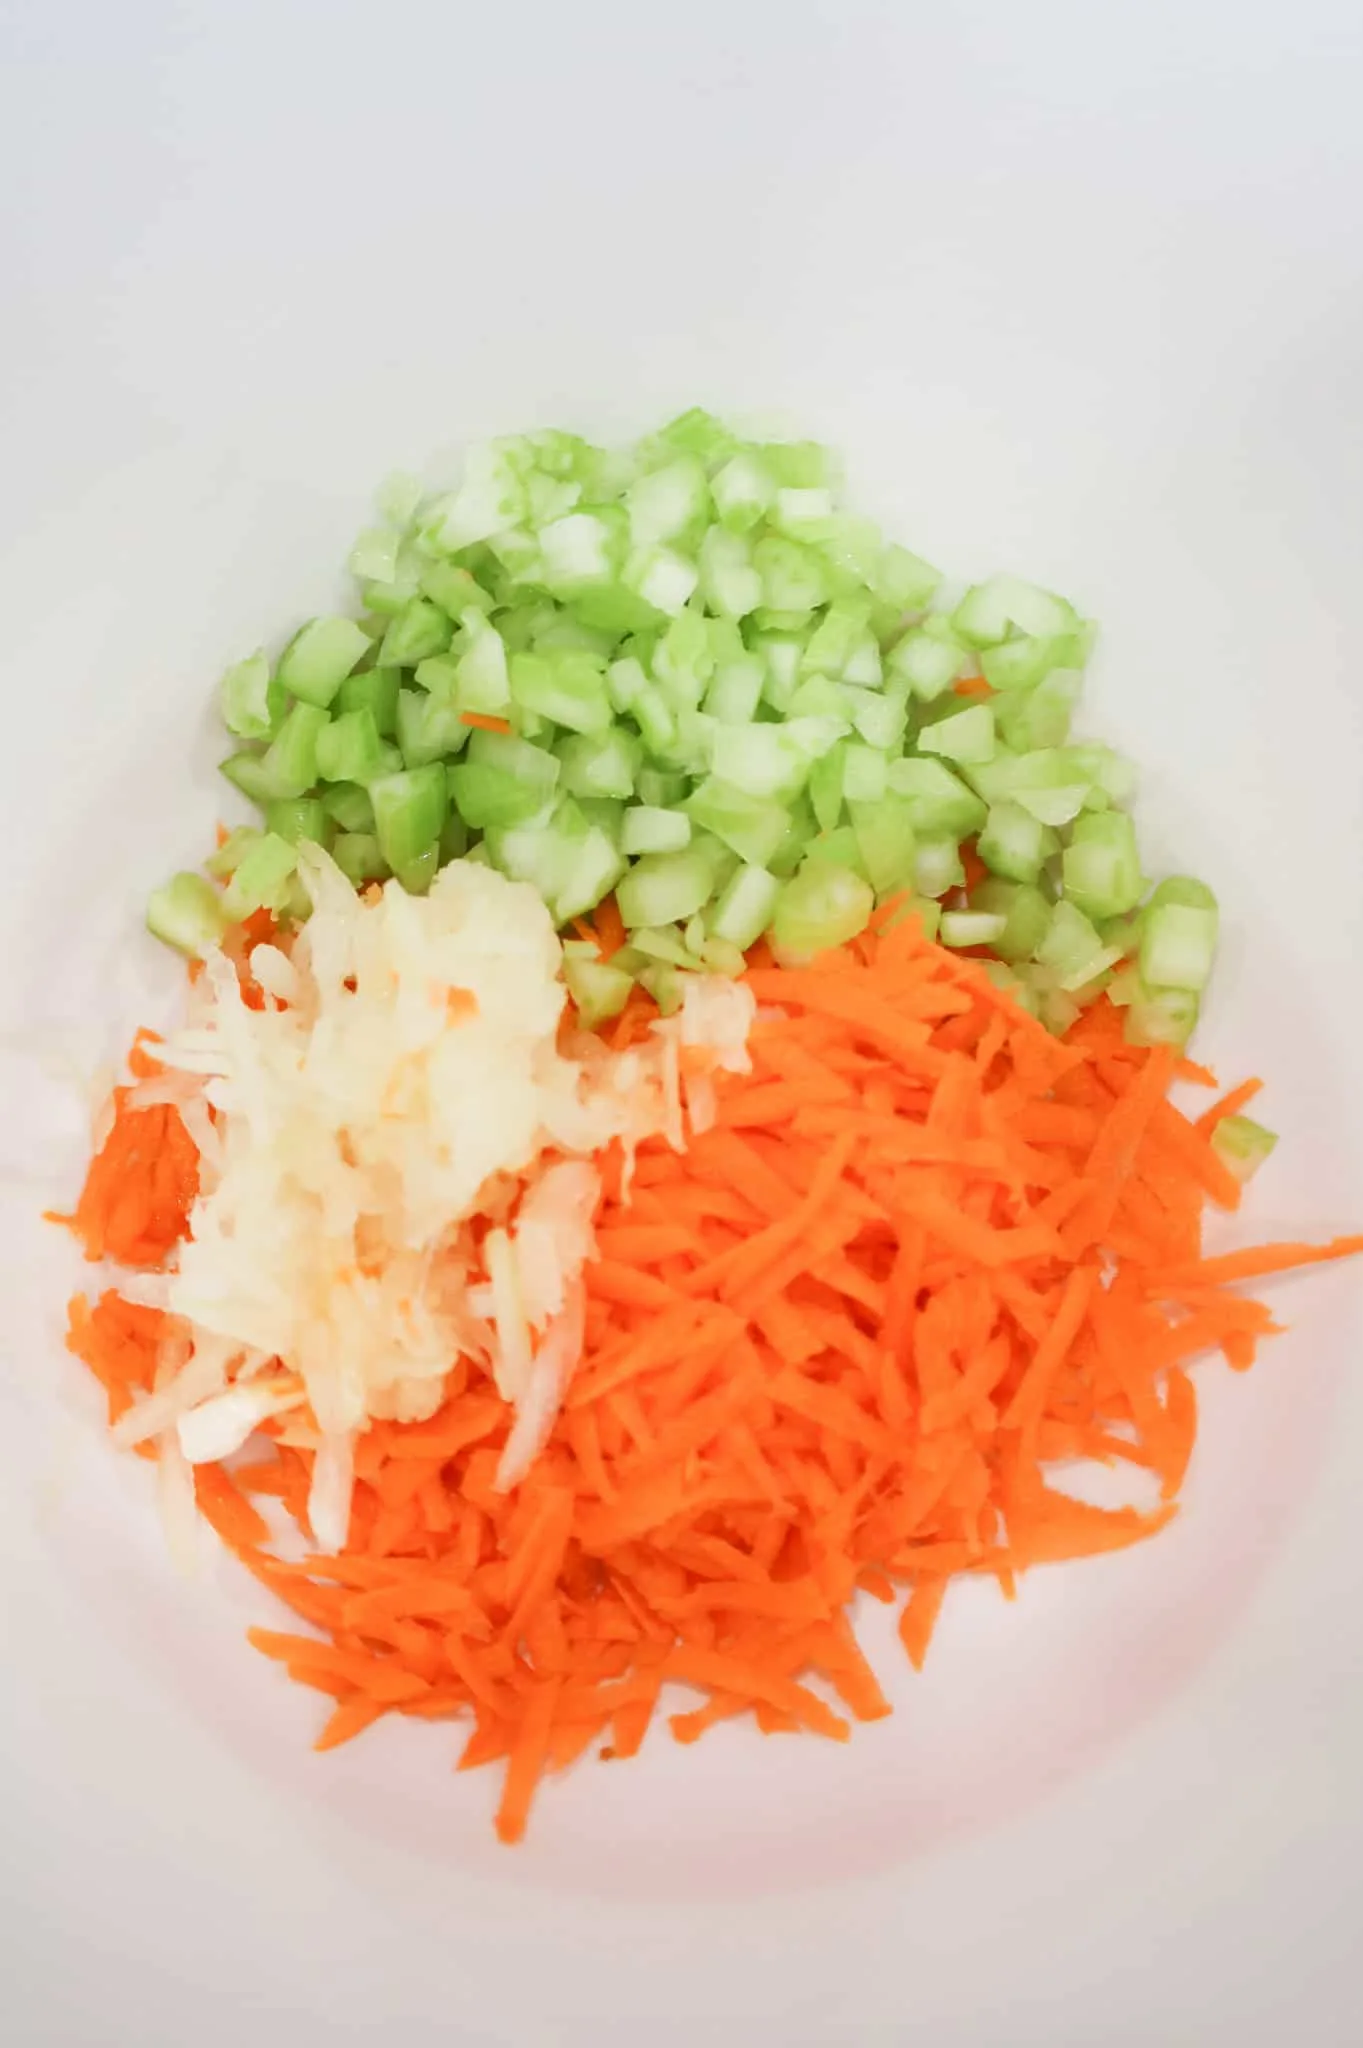 grated onion, carrot and diced celery in a mixing bowl